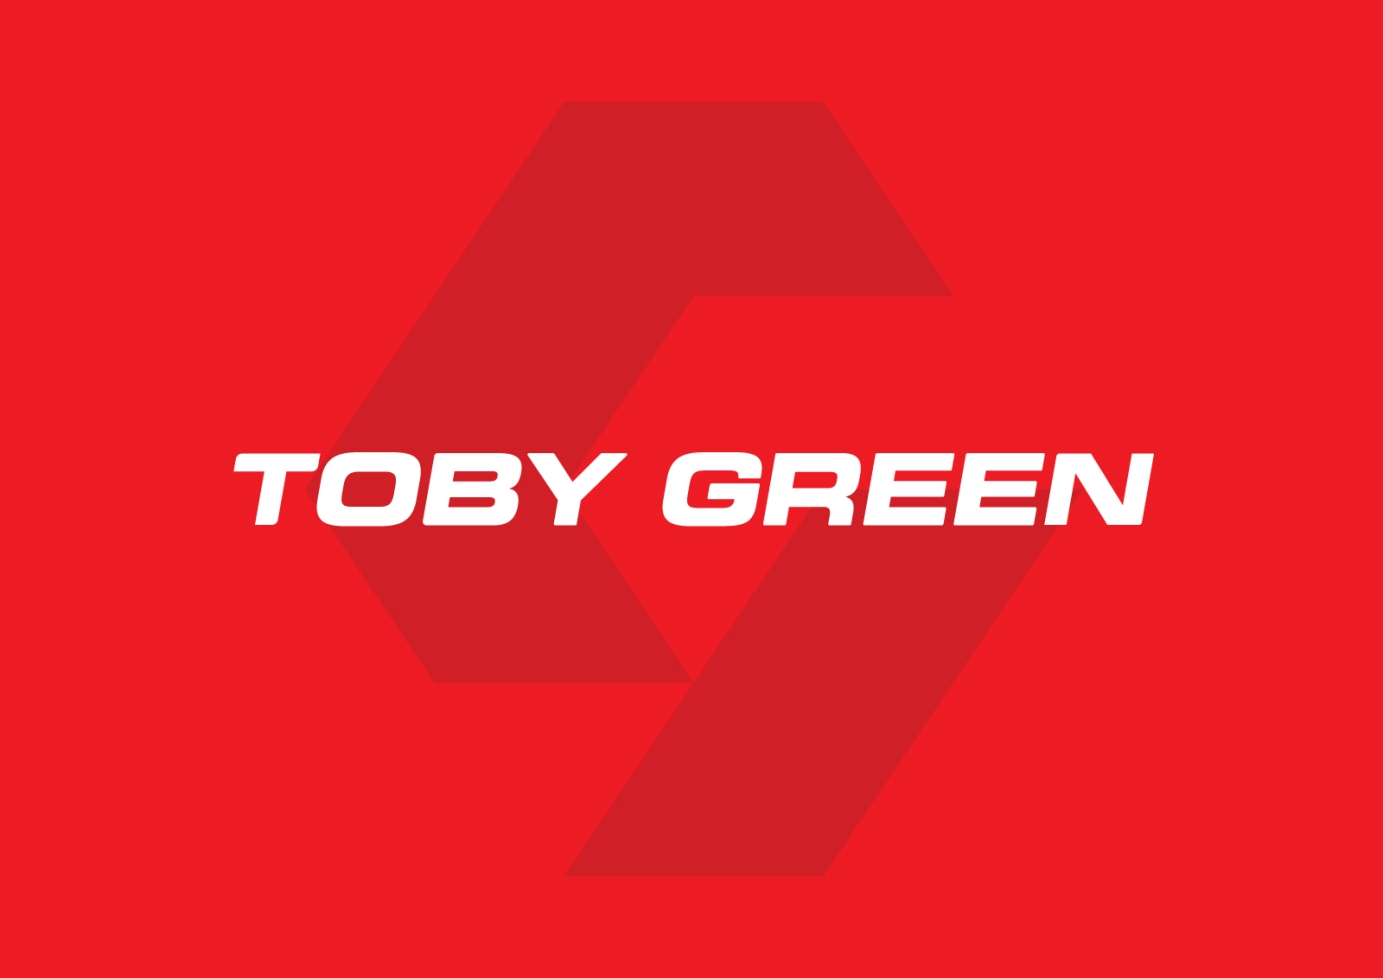 Branding for Toby Green by Tristan Palmer